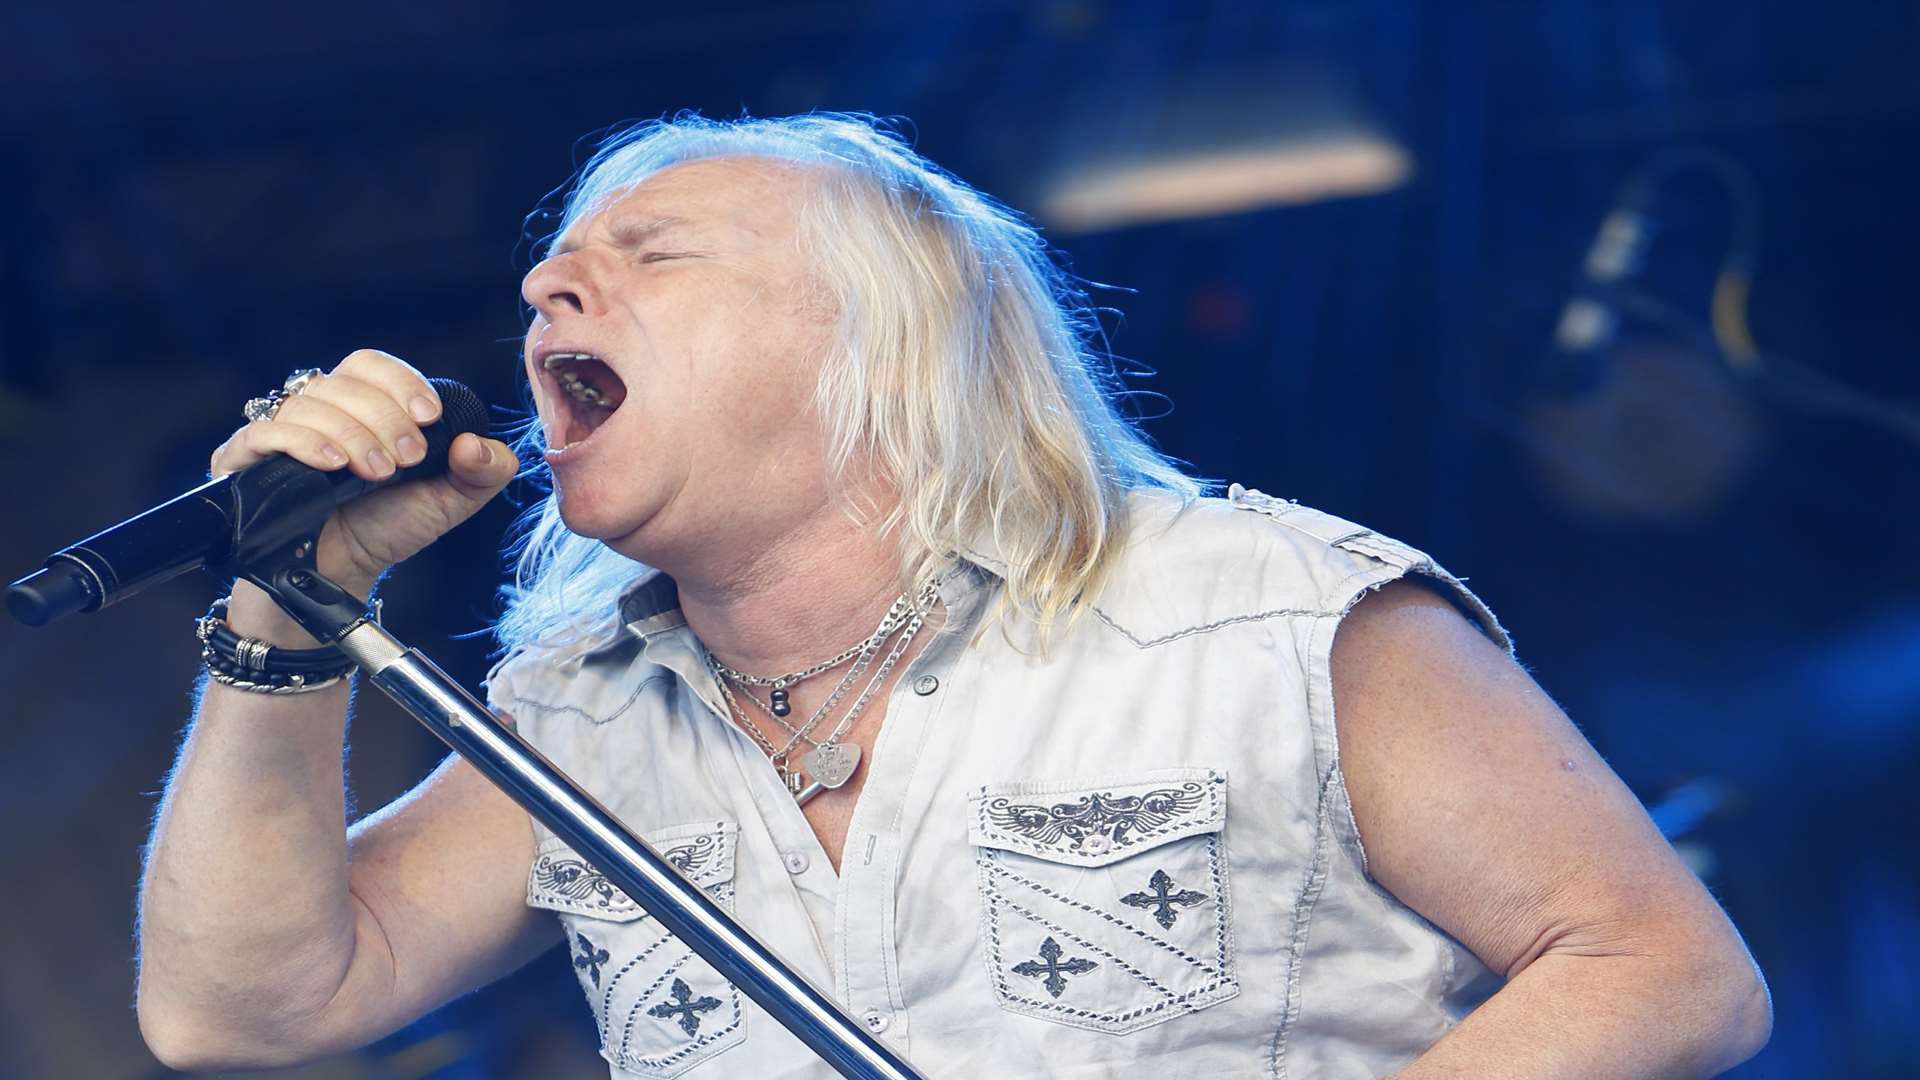 Uriah Heep make their only UK festival appearance at A New Day this weekend